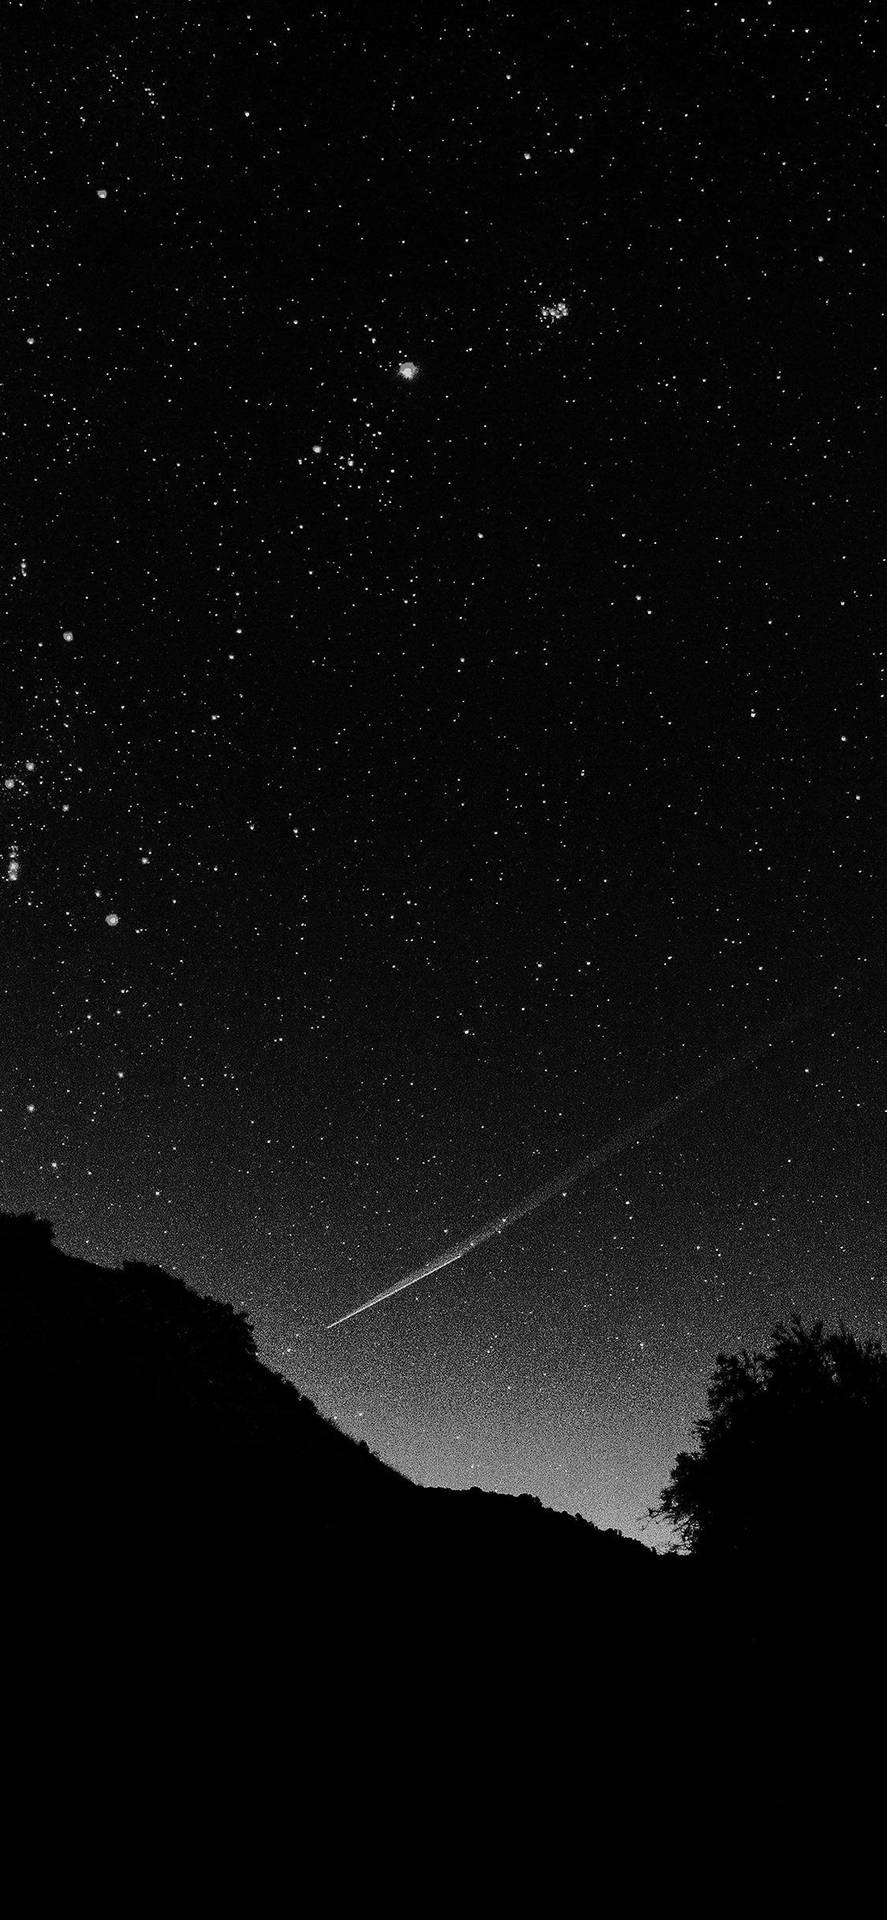 Night Sky With Shooting Star Solid Black iPhone Wallpaper